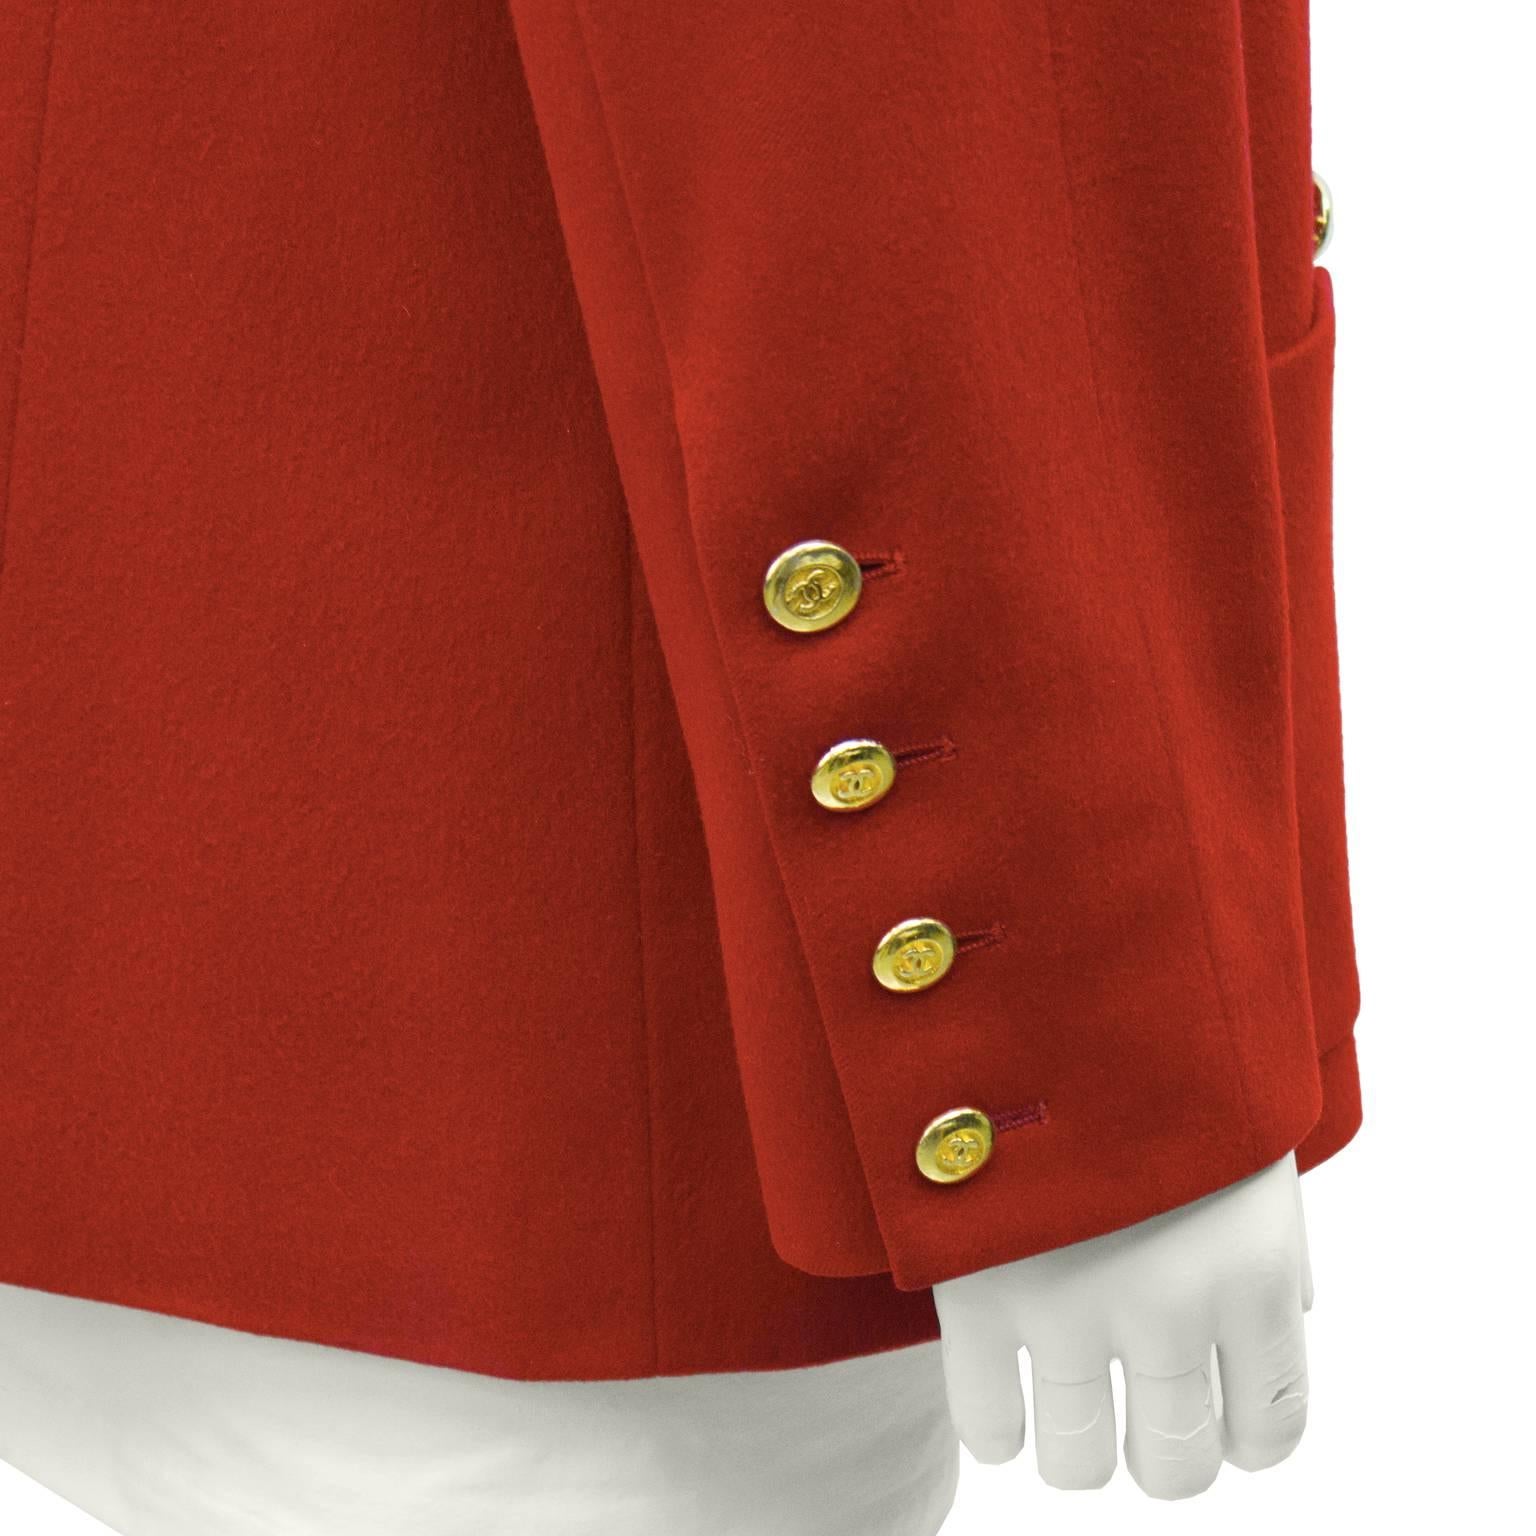 Women's 1980's Chanel Red Cashmere Blazer with Gold Buttons